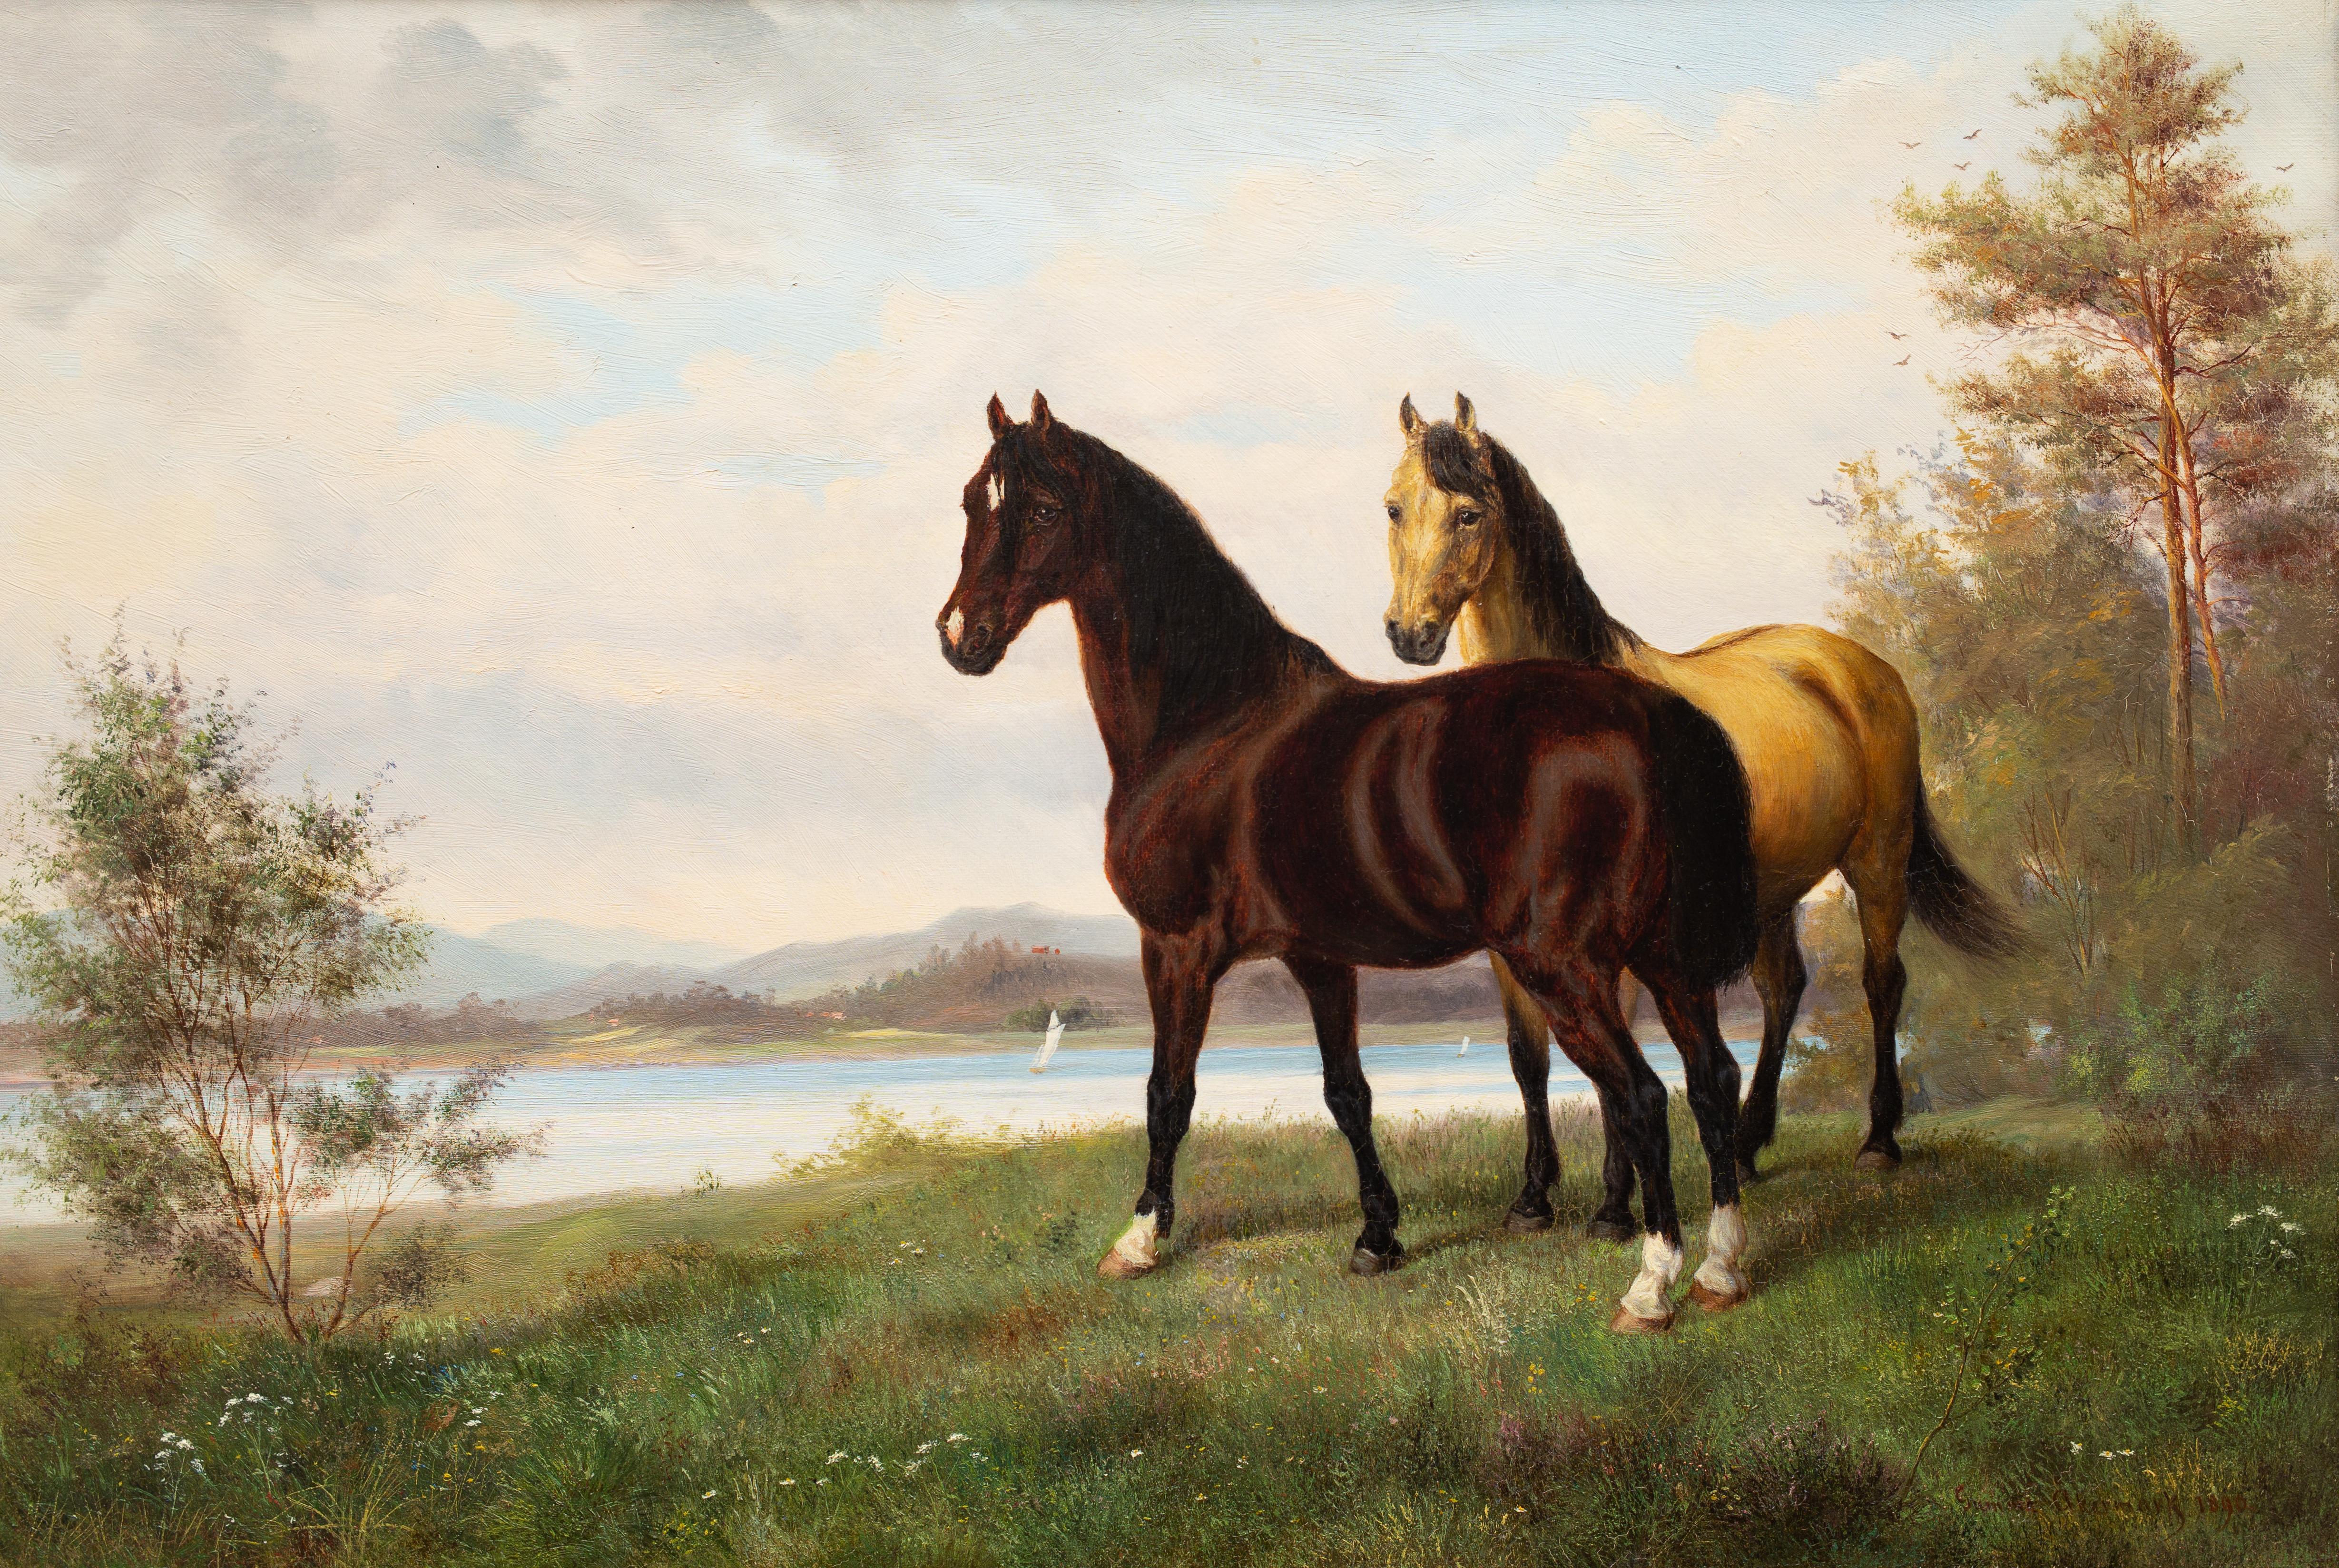 Two Horses in a Landscape With Sailboats in Distance, Swedish, Oil on Canvas  - Painting by Gumme Åkermark